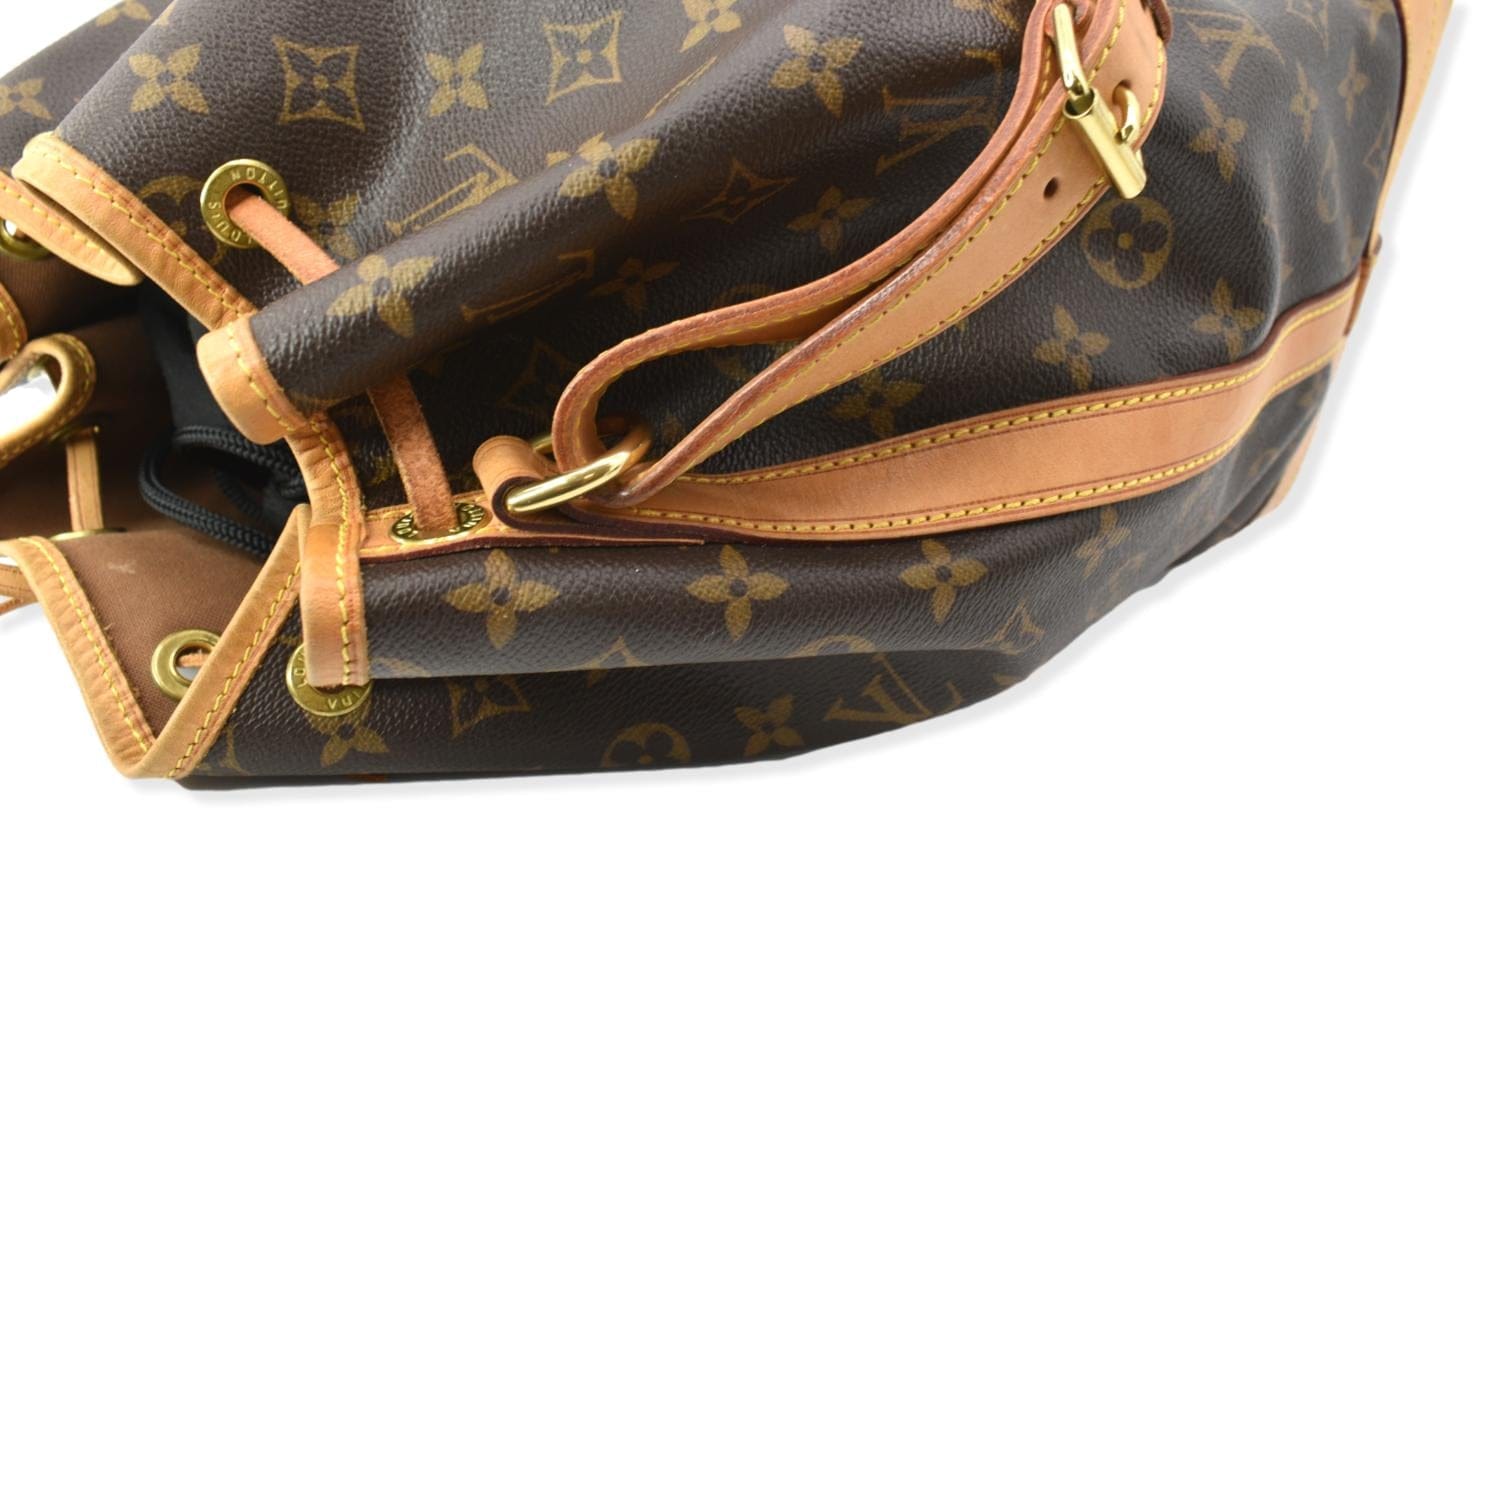 Lot - Louis Vuitton Noe PM Shoulder Bag, in a brown monogram coated canvas,  with vachetta leather and golden brass hardware, with a brown